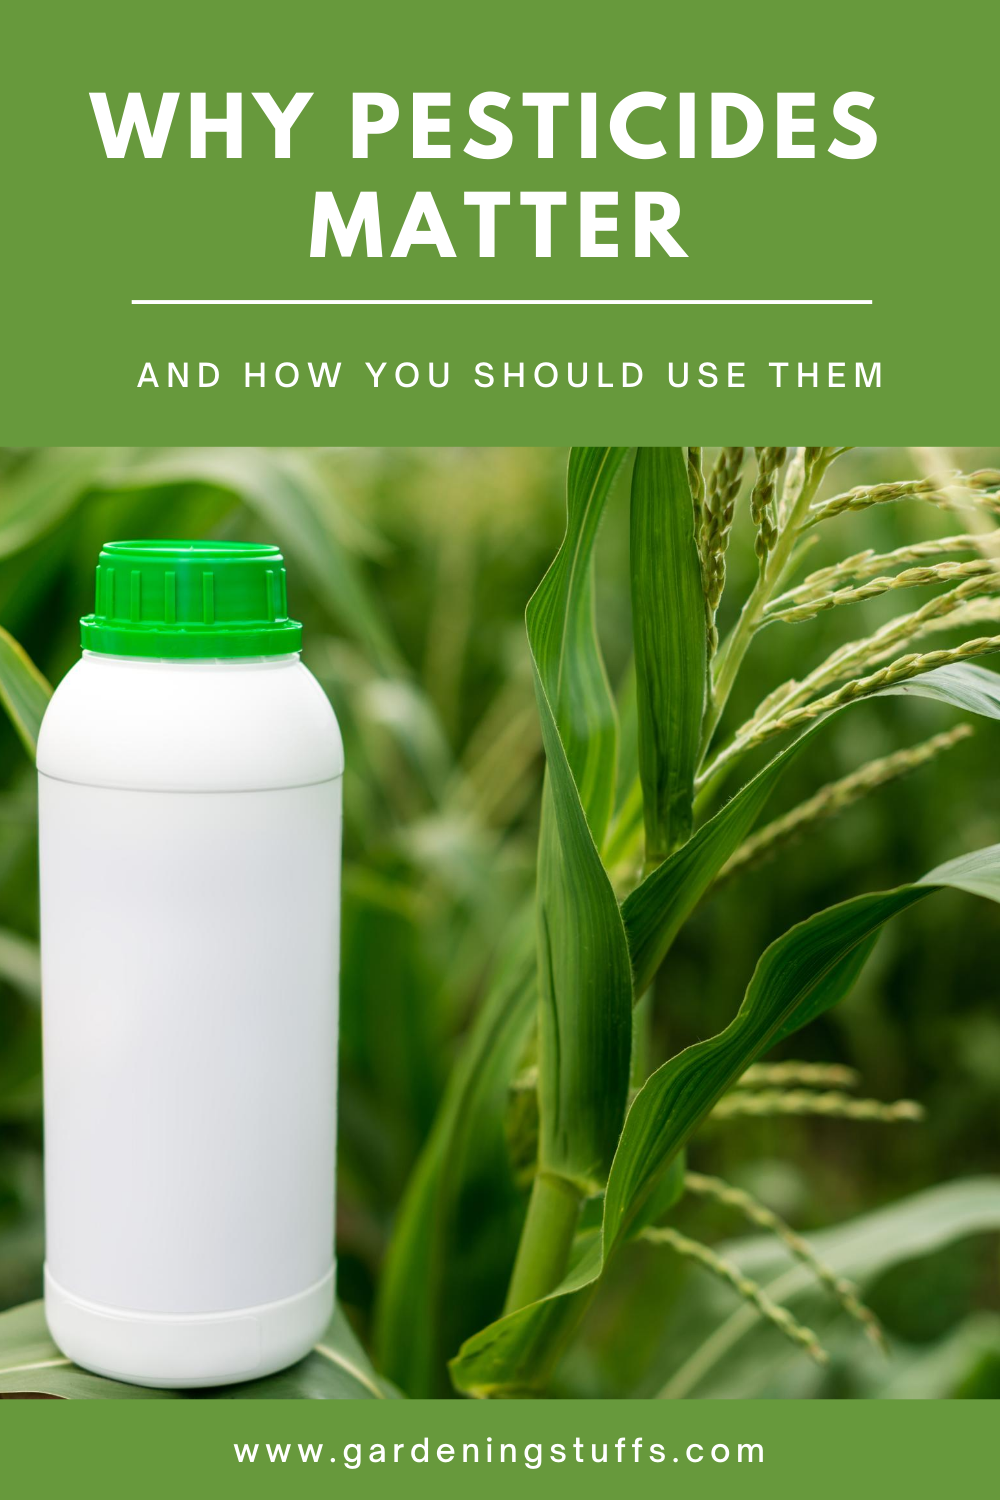 Read on and discover the many different types of pesticides, what they’re used for, the potential harm they could cause, and how you should apply them in your garden.